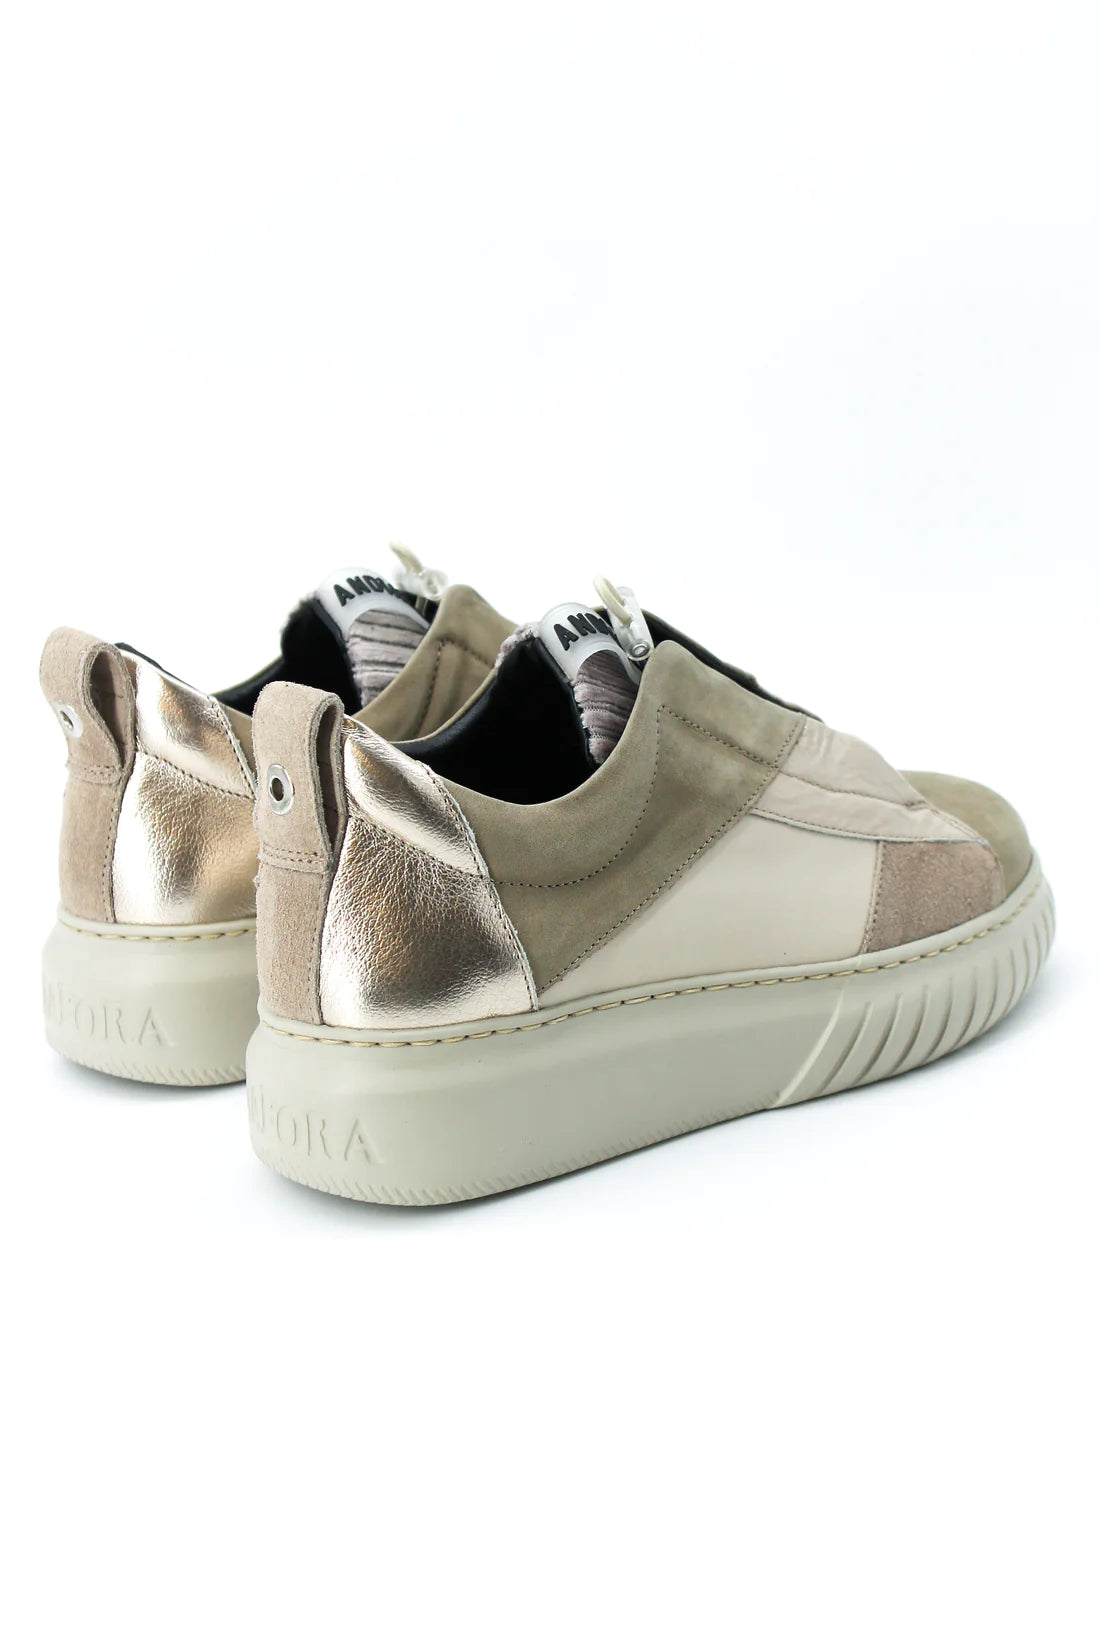 Andia Fora - Liby Patch Beige Multi Trainer